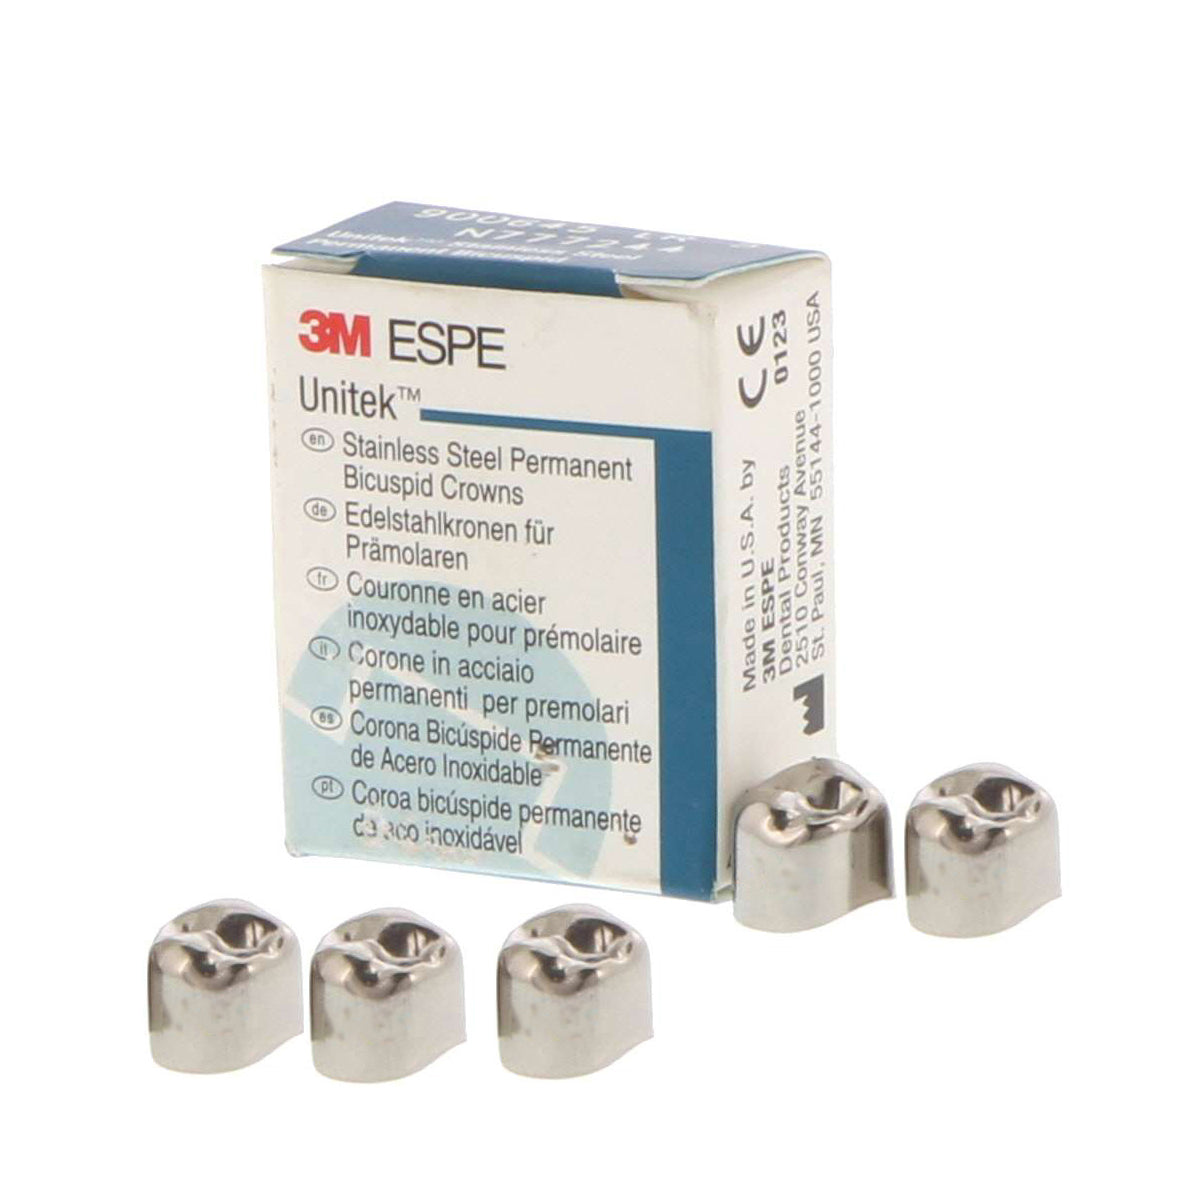 3M ESPE Unitek #1 Upper Left Primary Lateral Stainless Steel Crown For Clinician Fit Control- 5 Crowns/Box